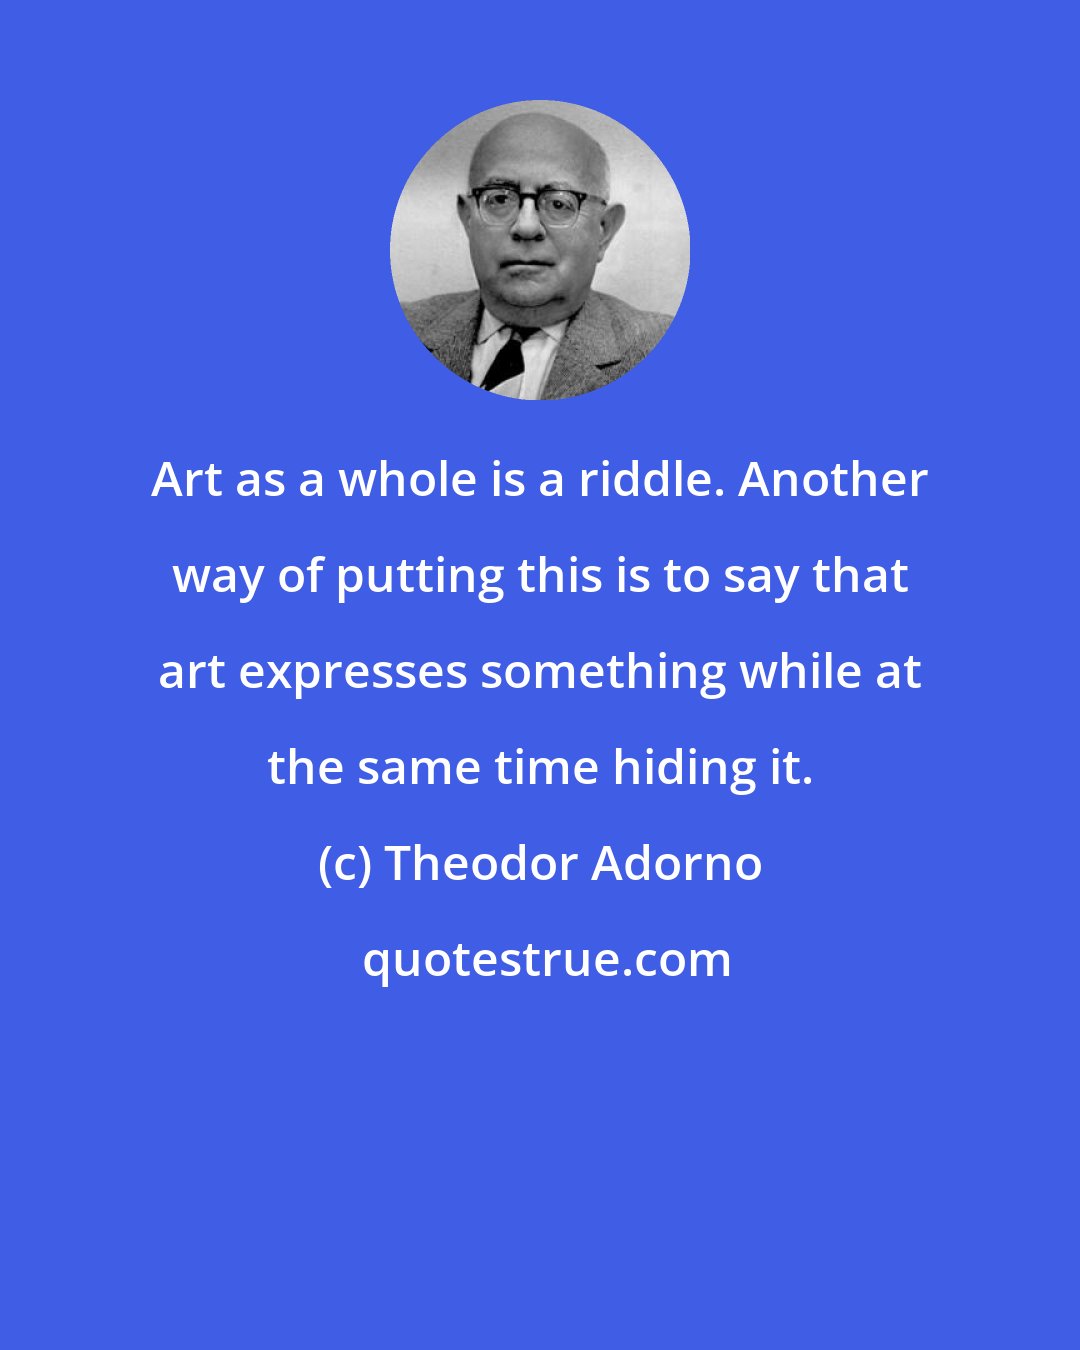 Theodor Adorno: Art as a whole is a riddle. Another way of putting this is to say that art expresses something while at the same time hiding it.